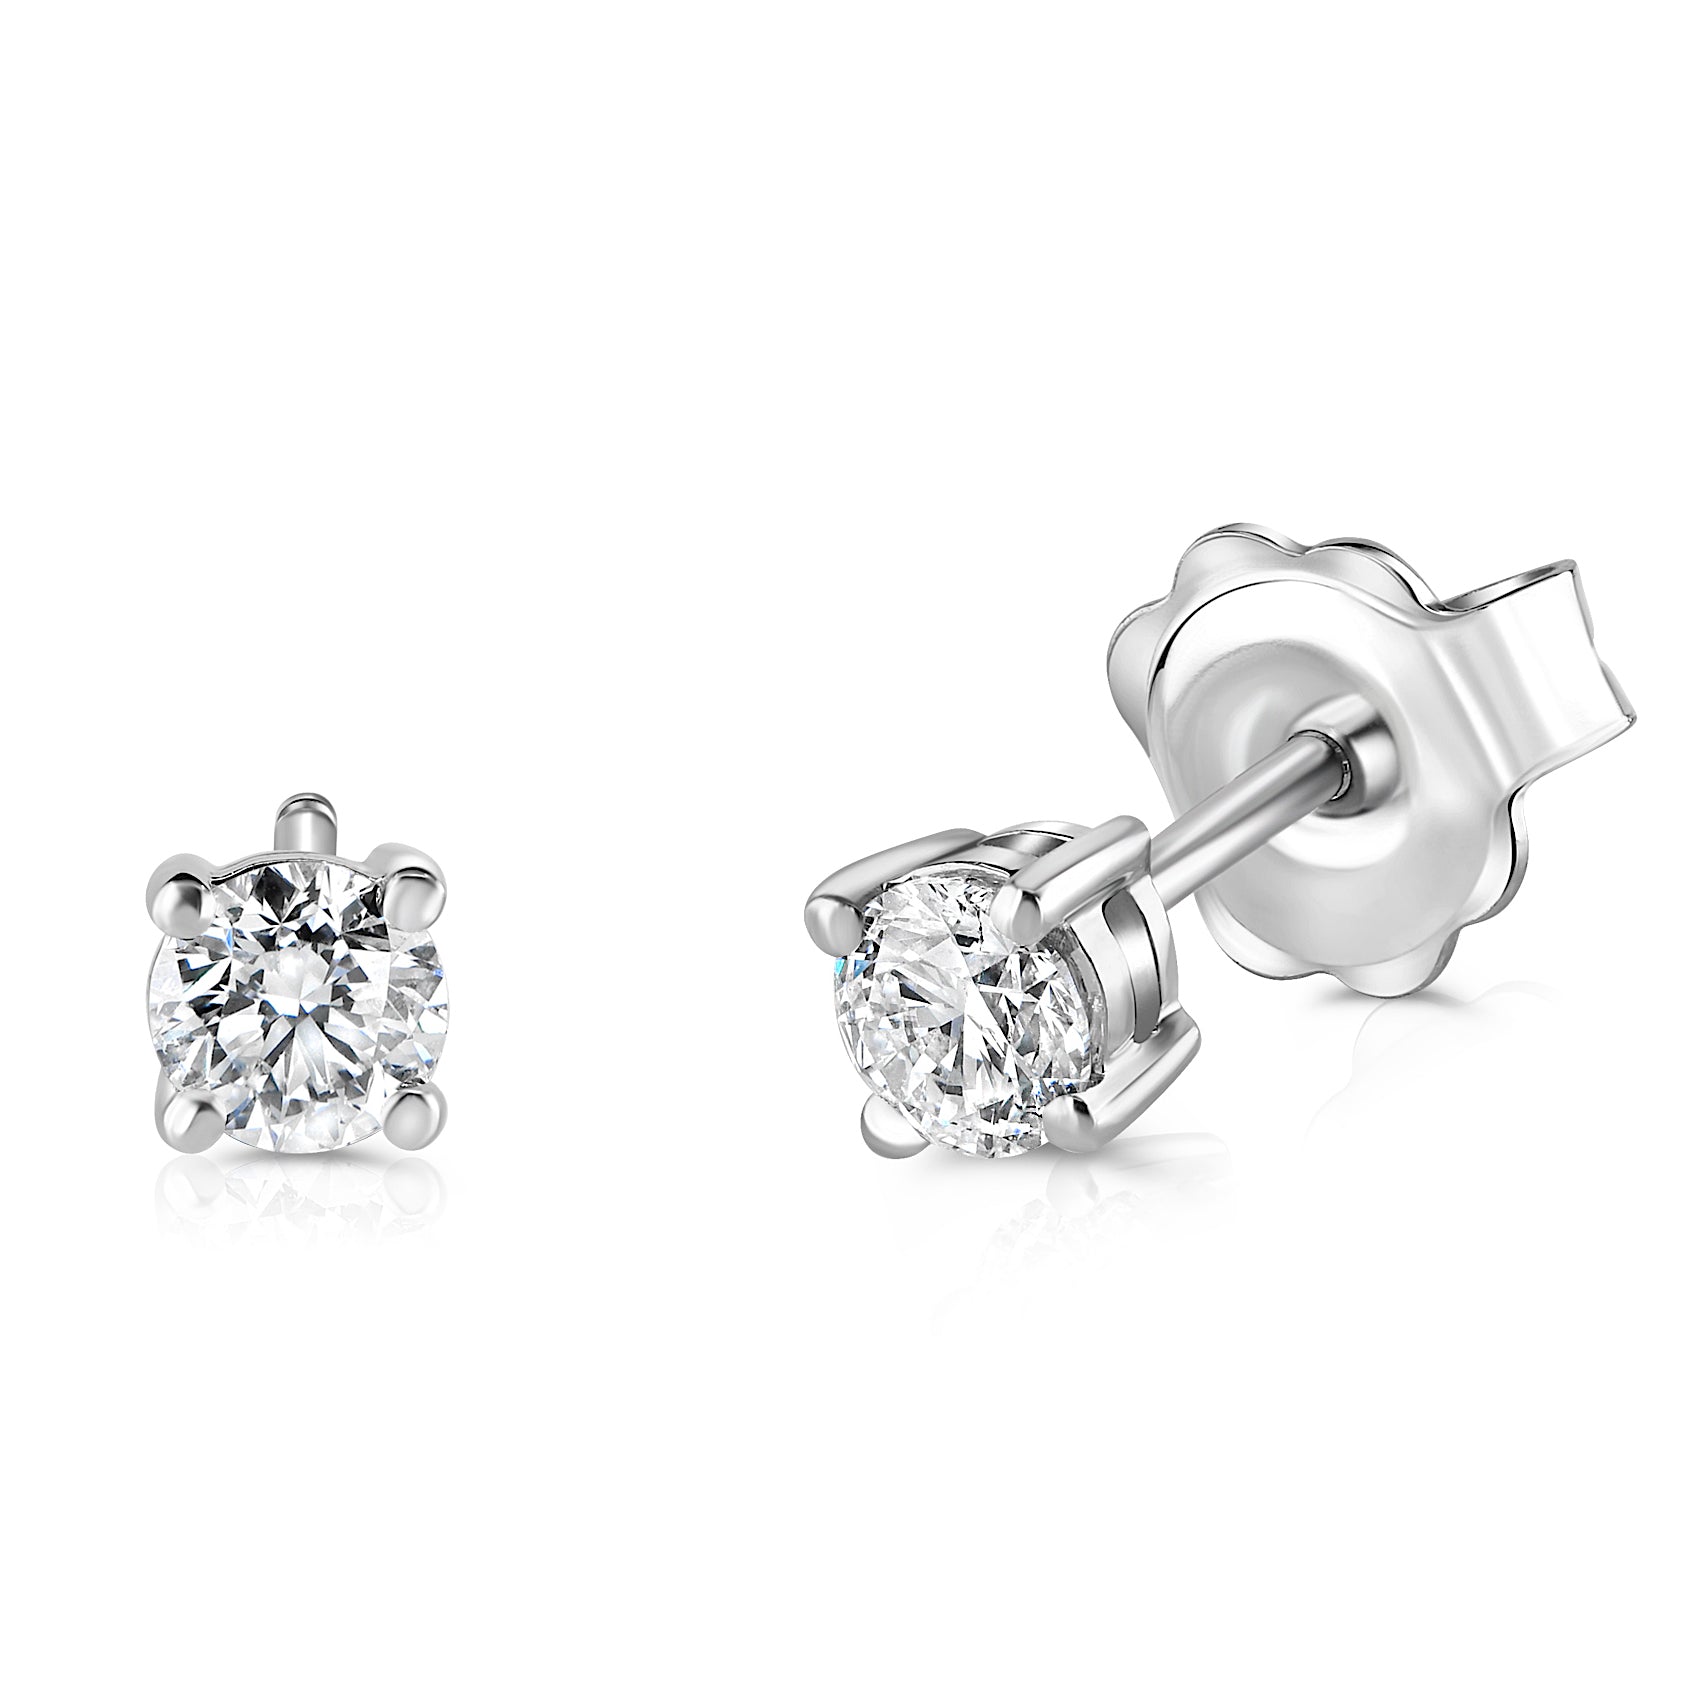 0.21ct diamond stud earrings set in 18kt white gold, G/H colour, SI clarity